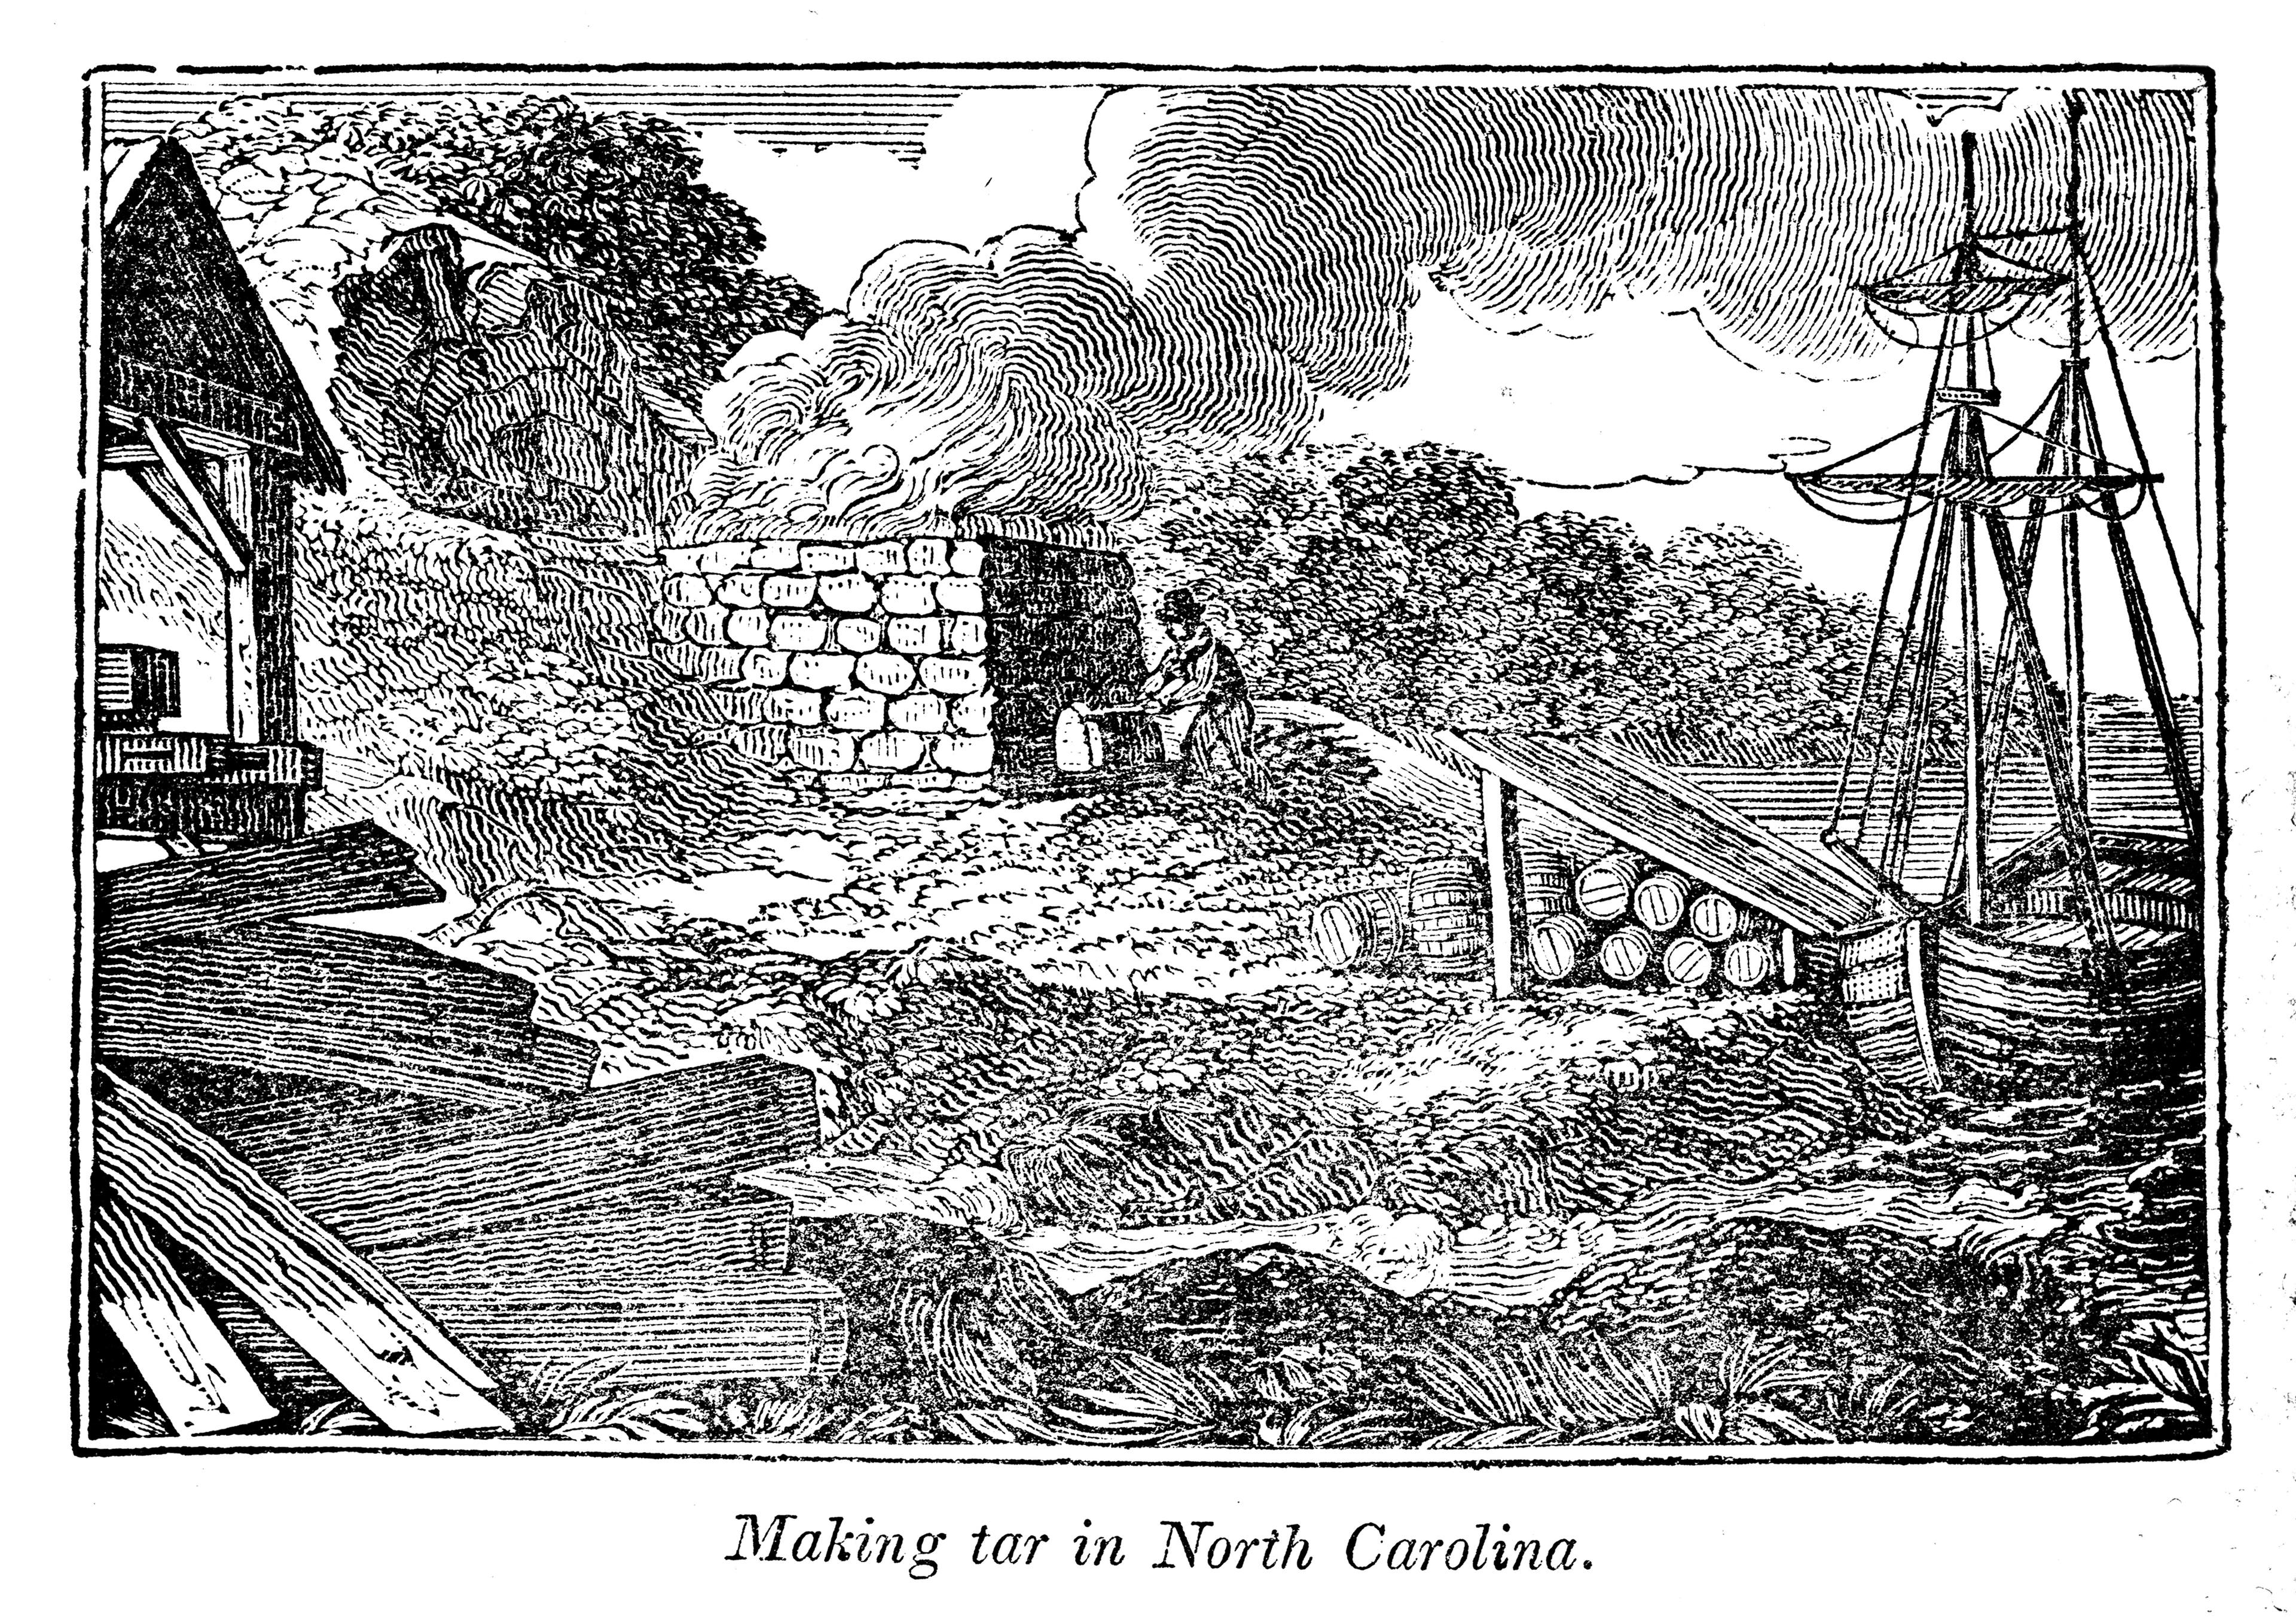 Illustration depicts aspects of the process of tar production, North Carolina, mid eighteenth century. Distilled pine wood was painted onto the surface of wooden boats for preservation. Published in &#039;A Pictorial History of The United States&#039; (1845). (Photo by Interim Archives/Getty Images)